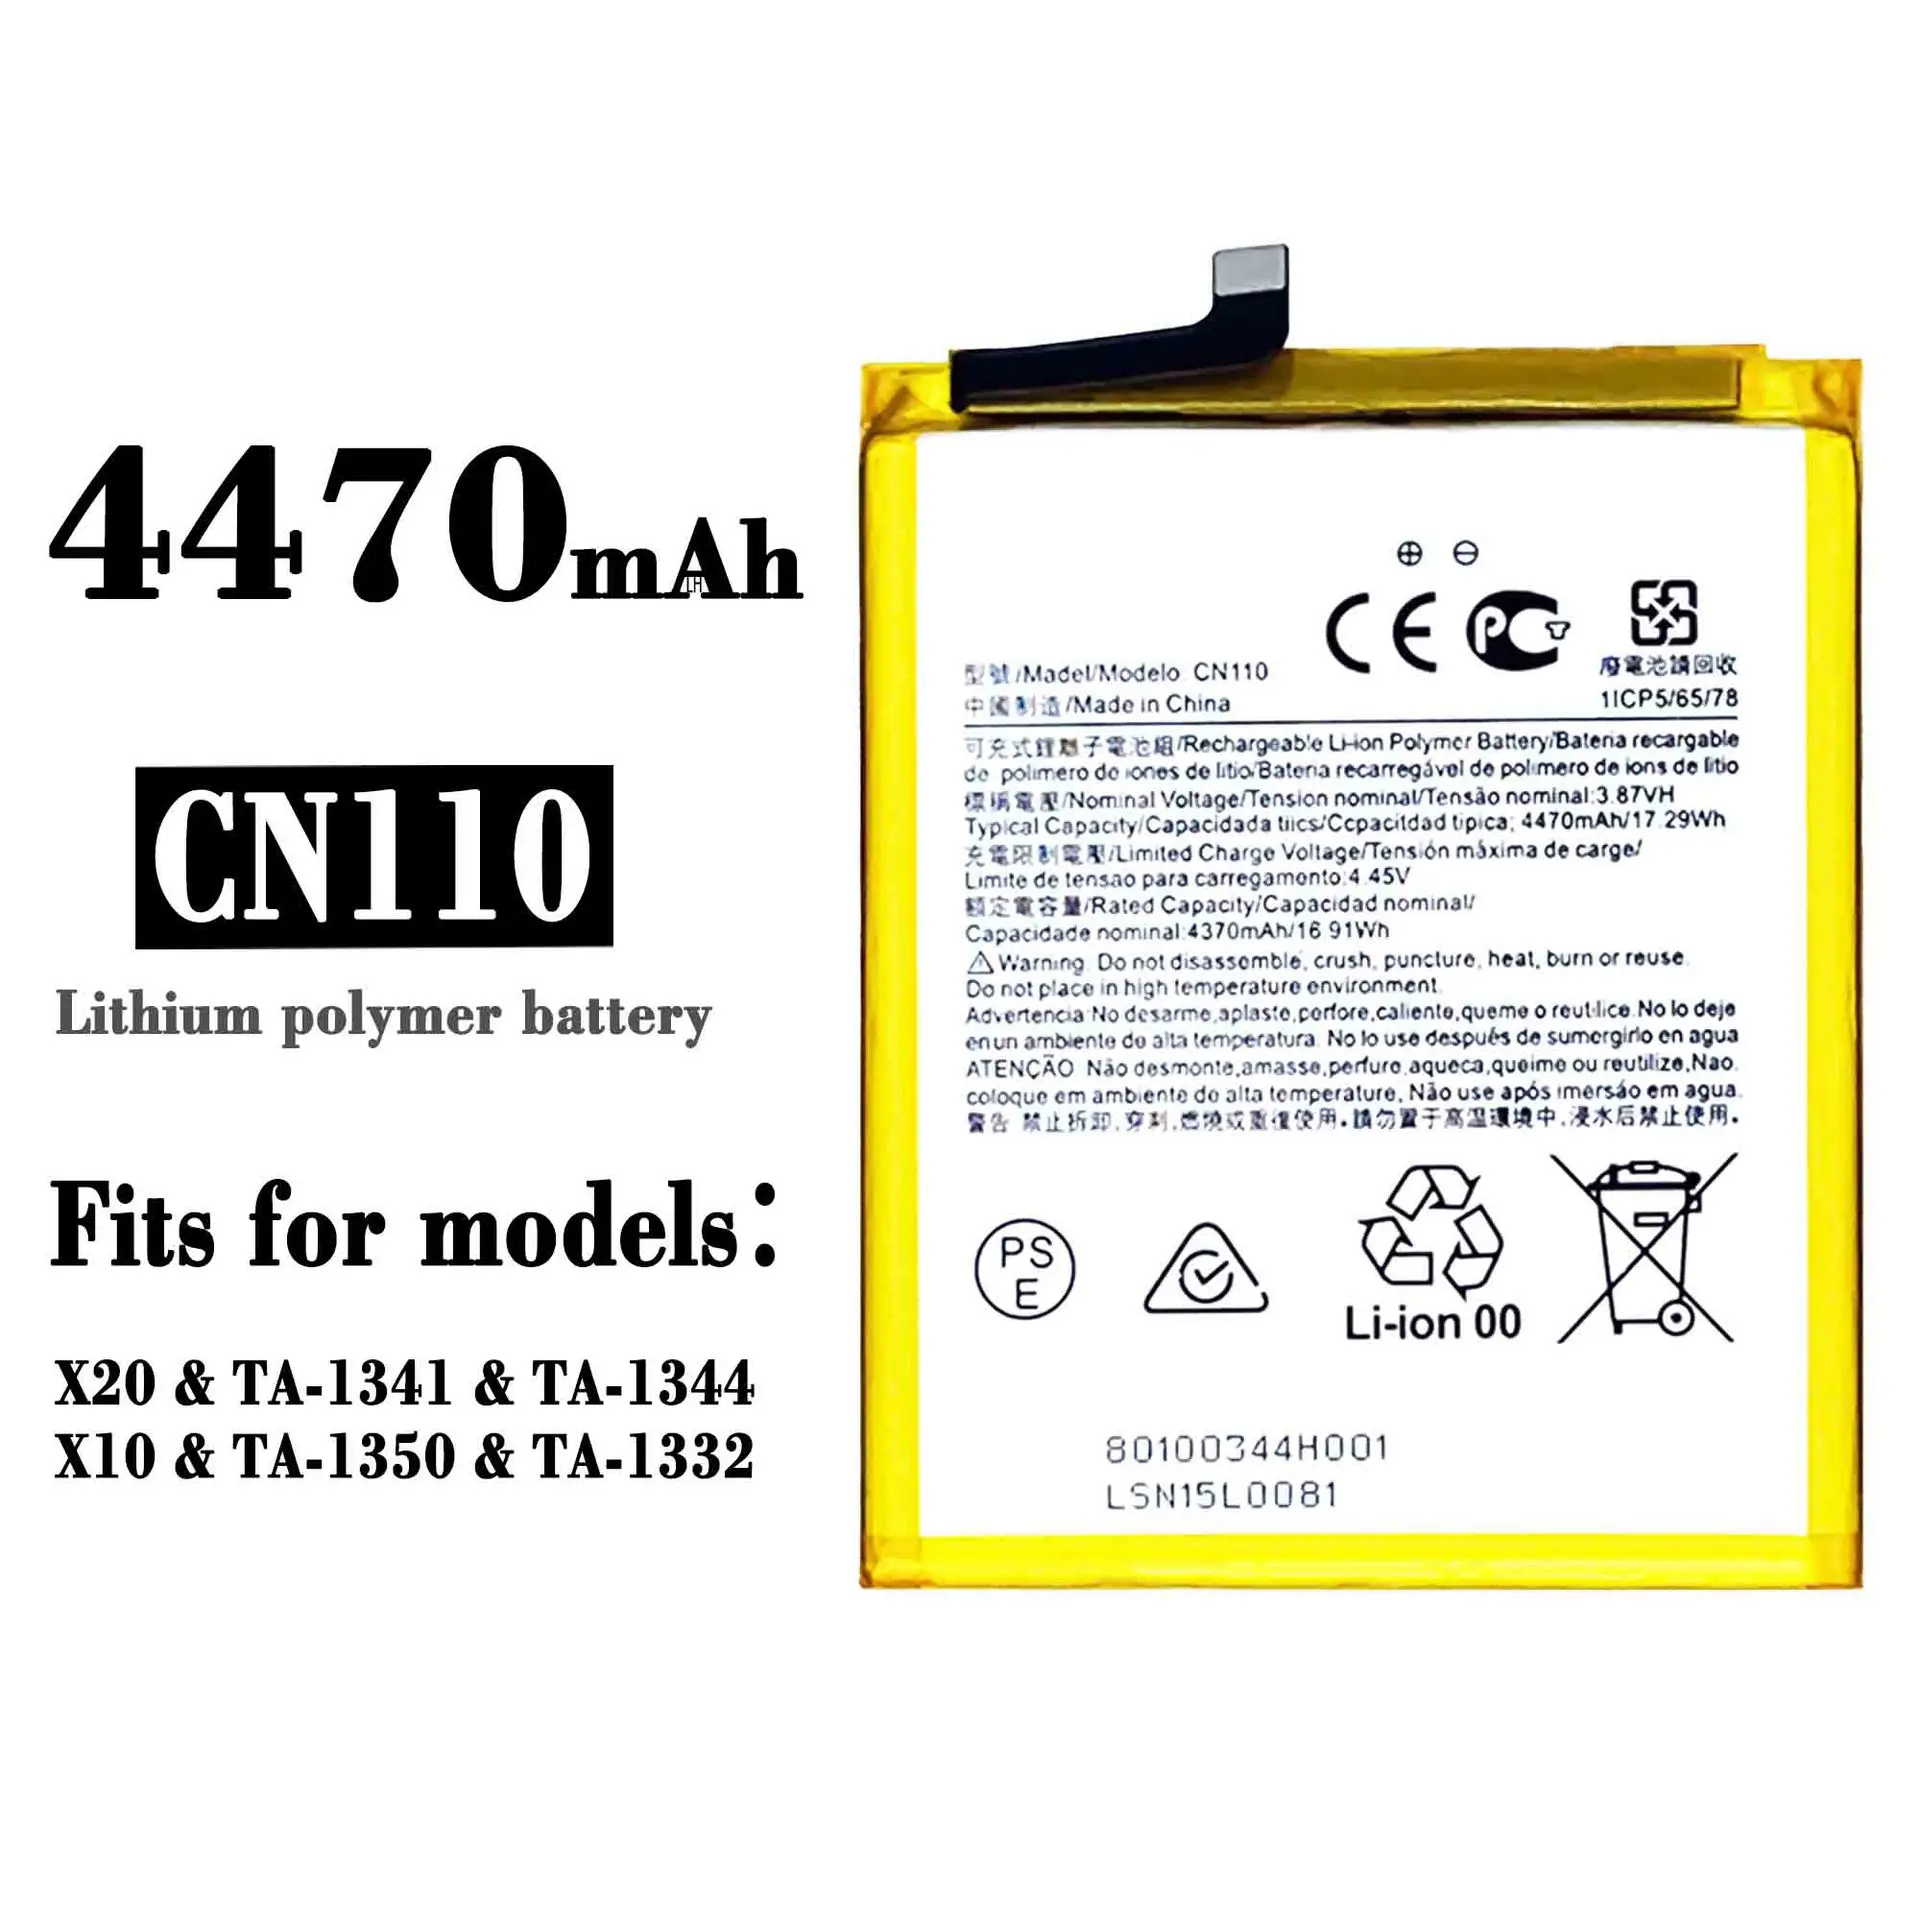 

100% Orginal High Quality Replacement Battery For Nokia X20 X10 New CN110 4470mAh Mobile Phone Board Built-in New Battery